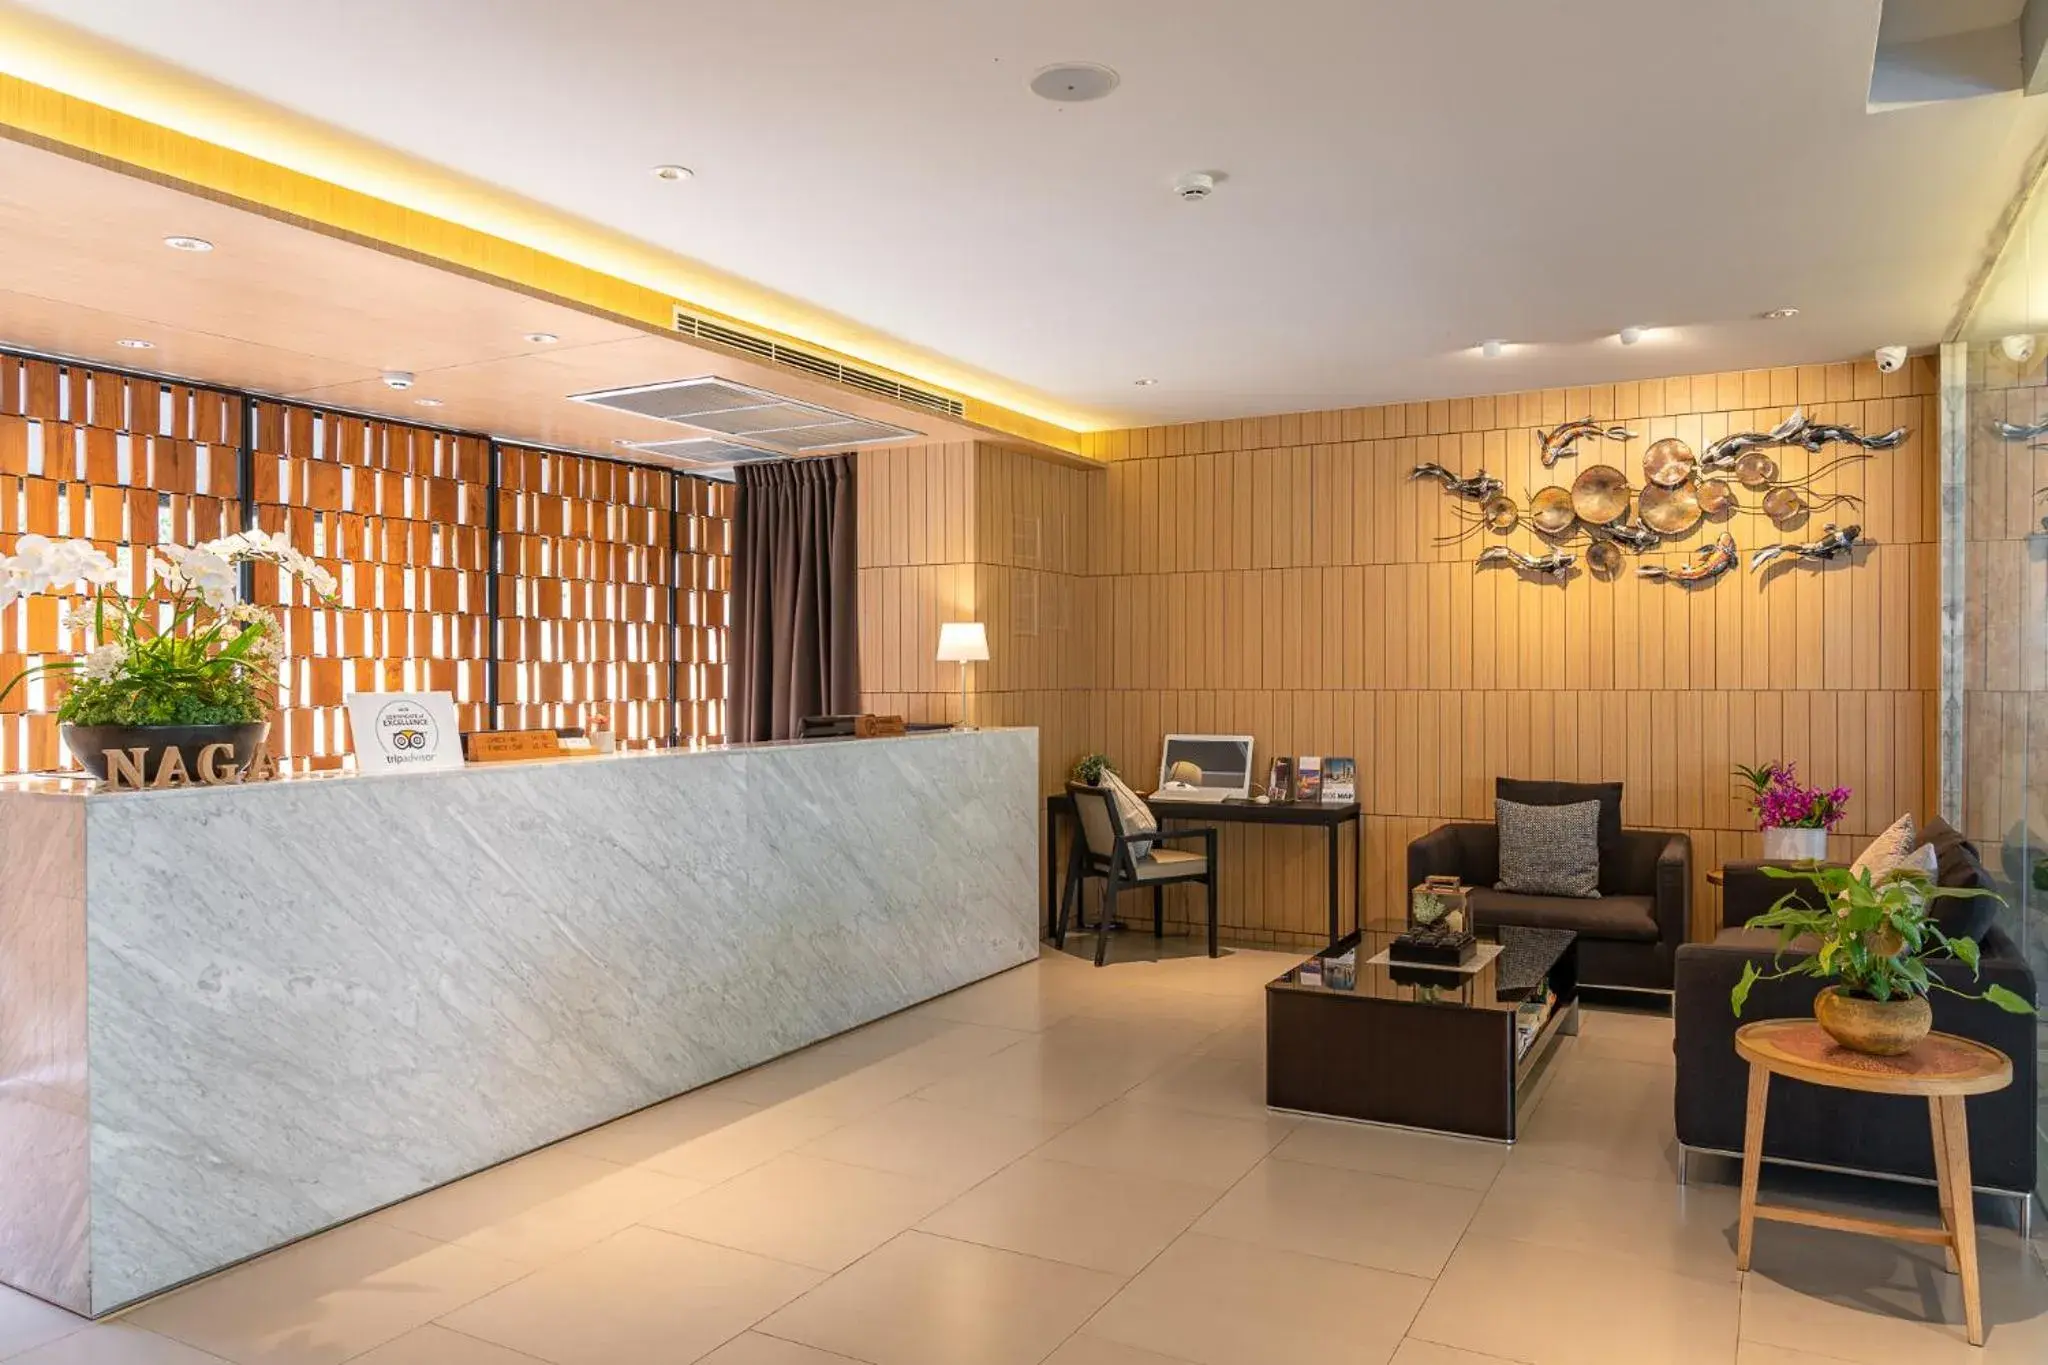 Property building, Lobby/Reception in Naga Residence